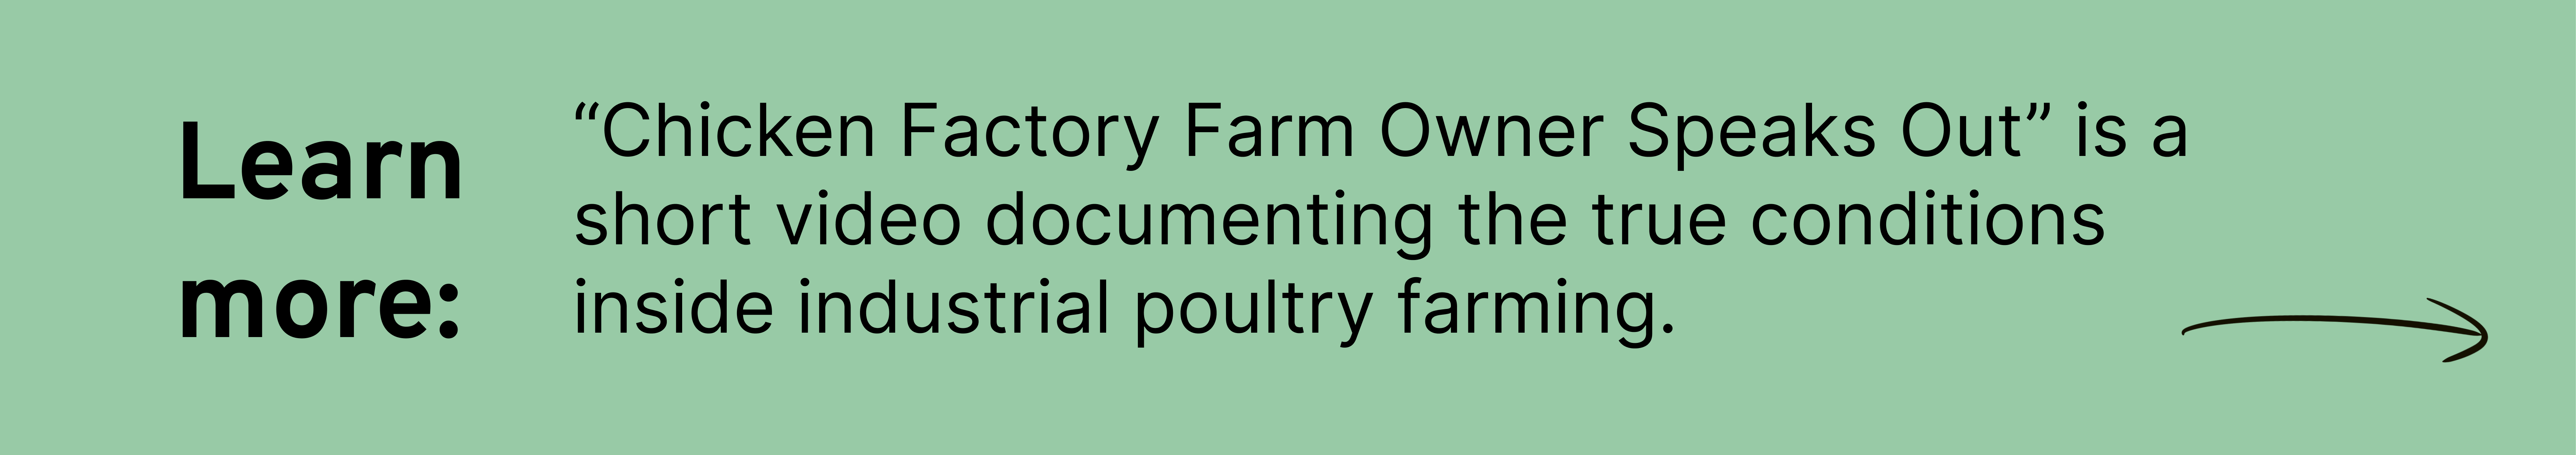 “Chicken Factory Farm Owner Speaks Out” is a short video documenting the true conditions inside industrial poultry farming. 